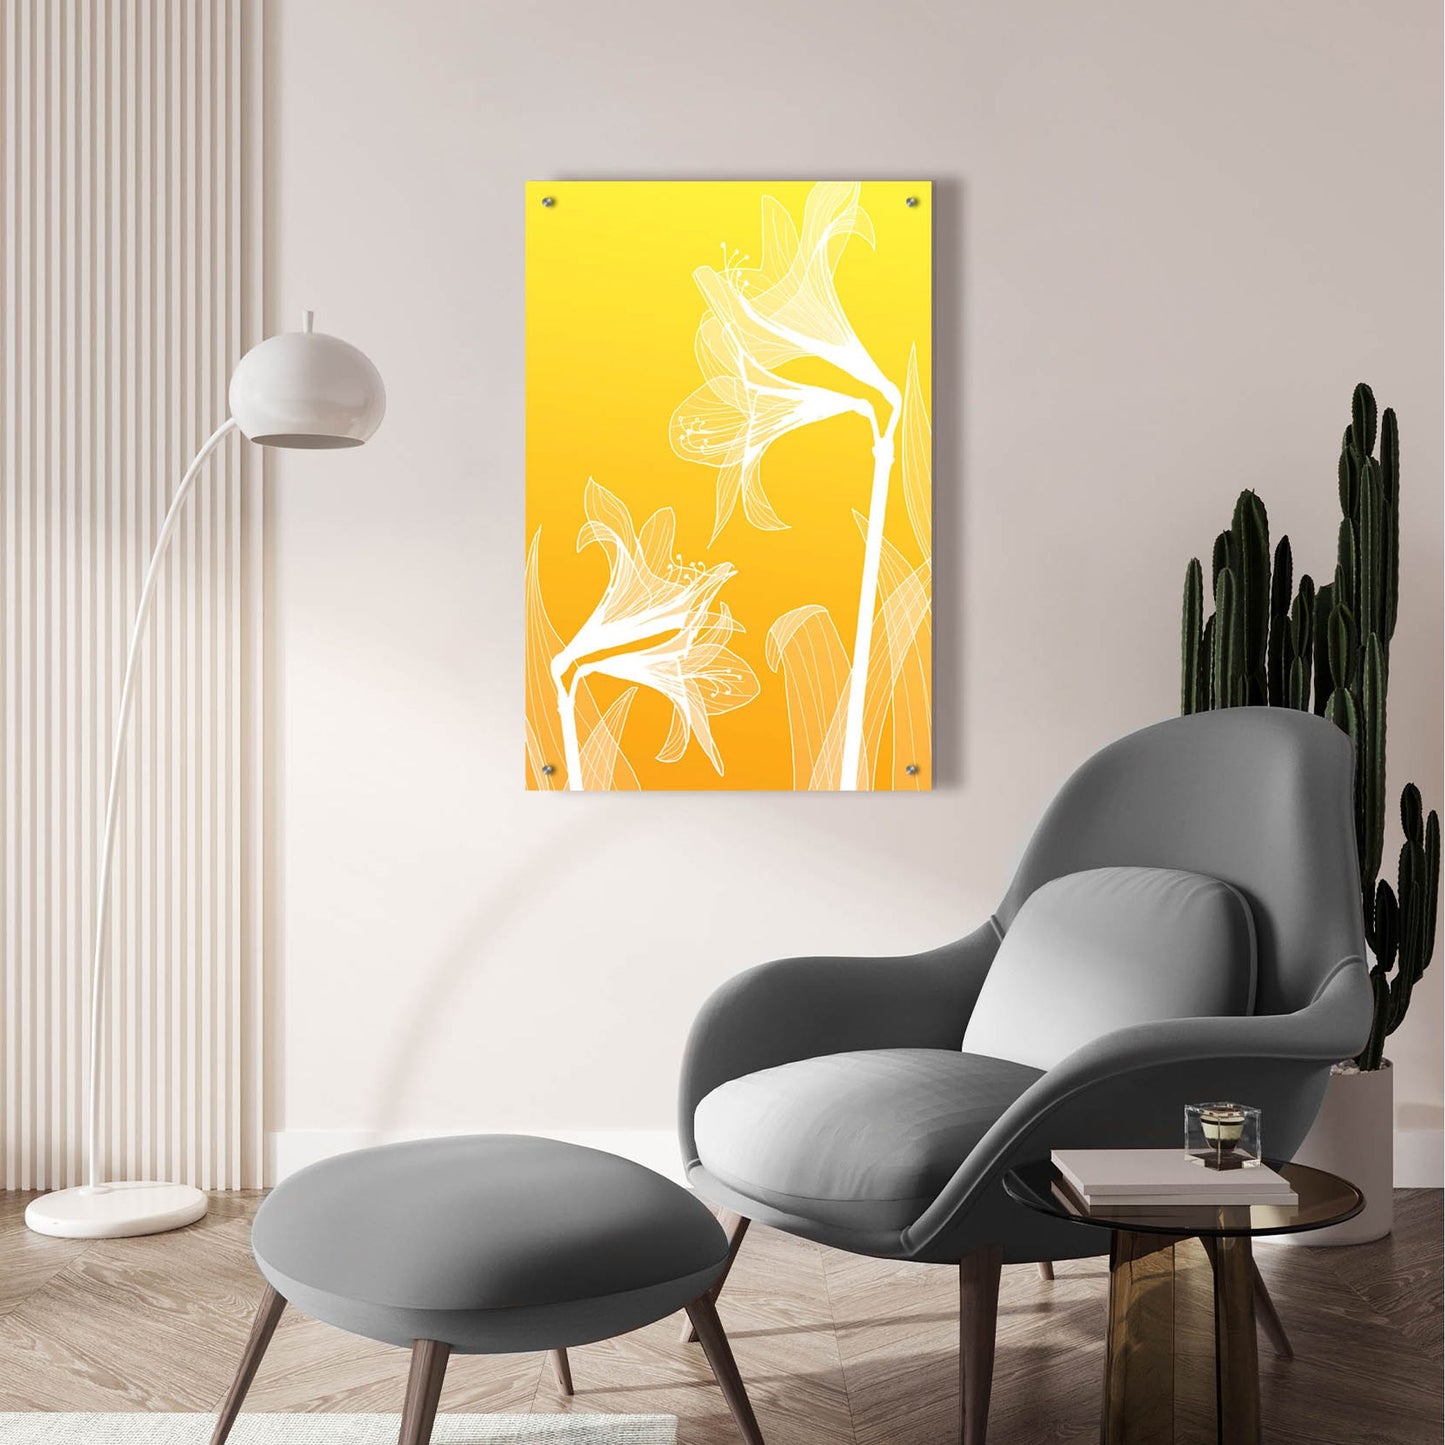 Epic Art 'Floral 3' by Graphinc, Acrylic Glass Wall Art,24x36